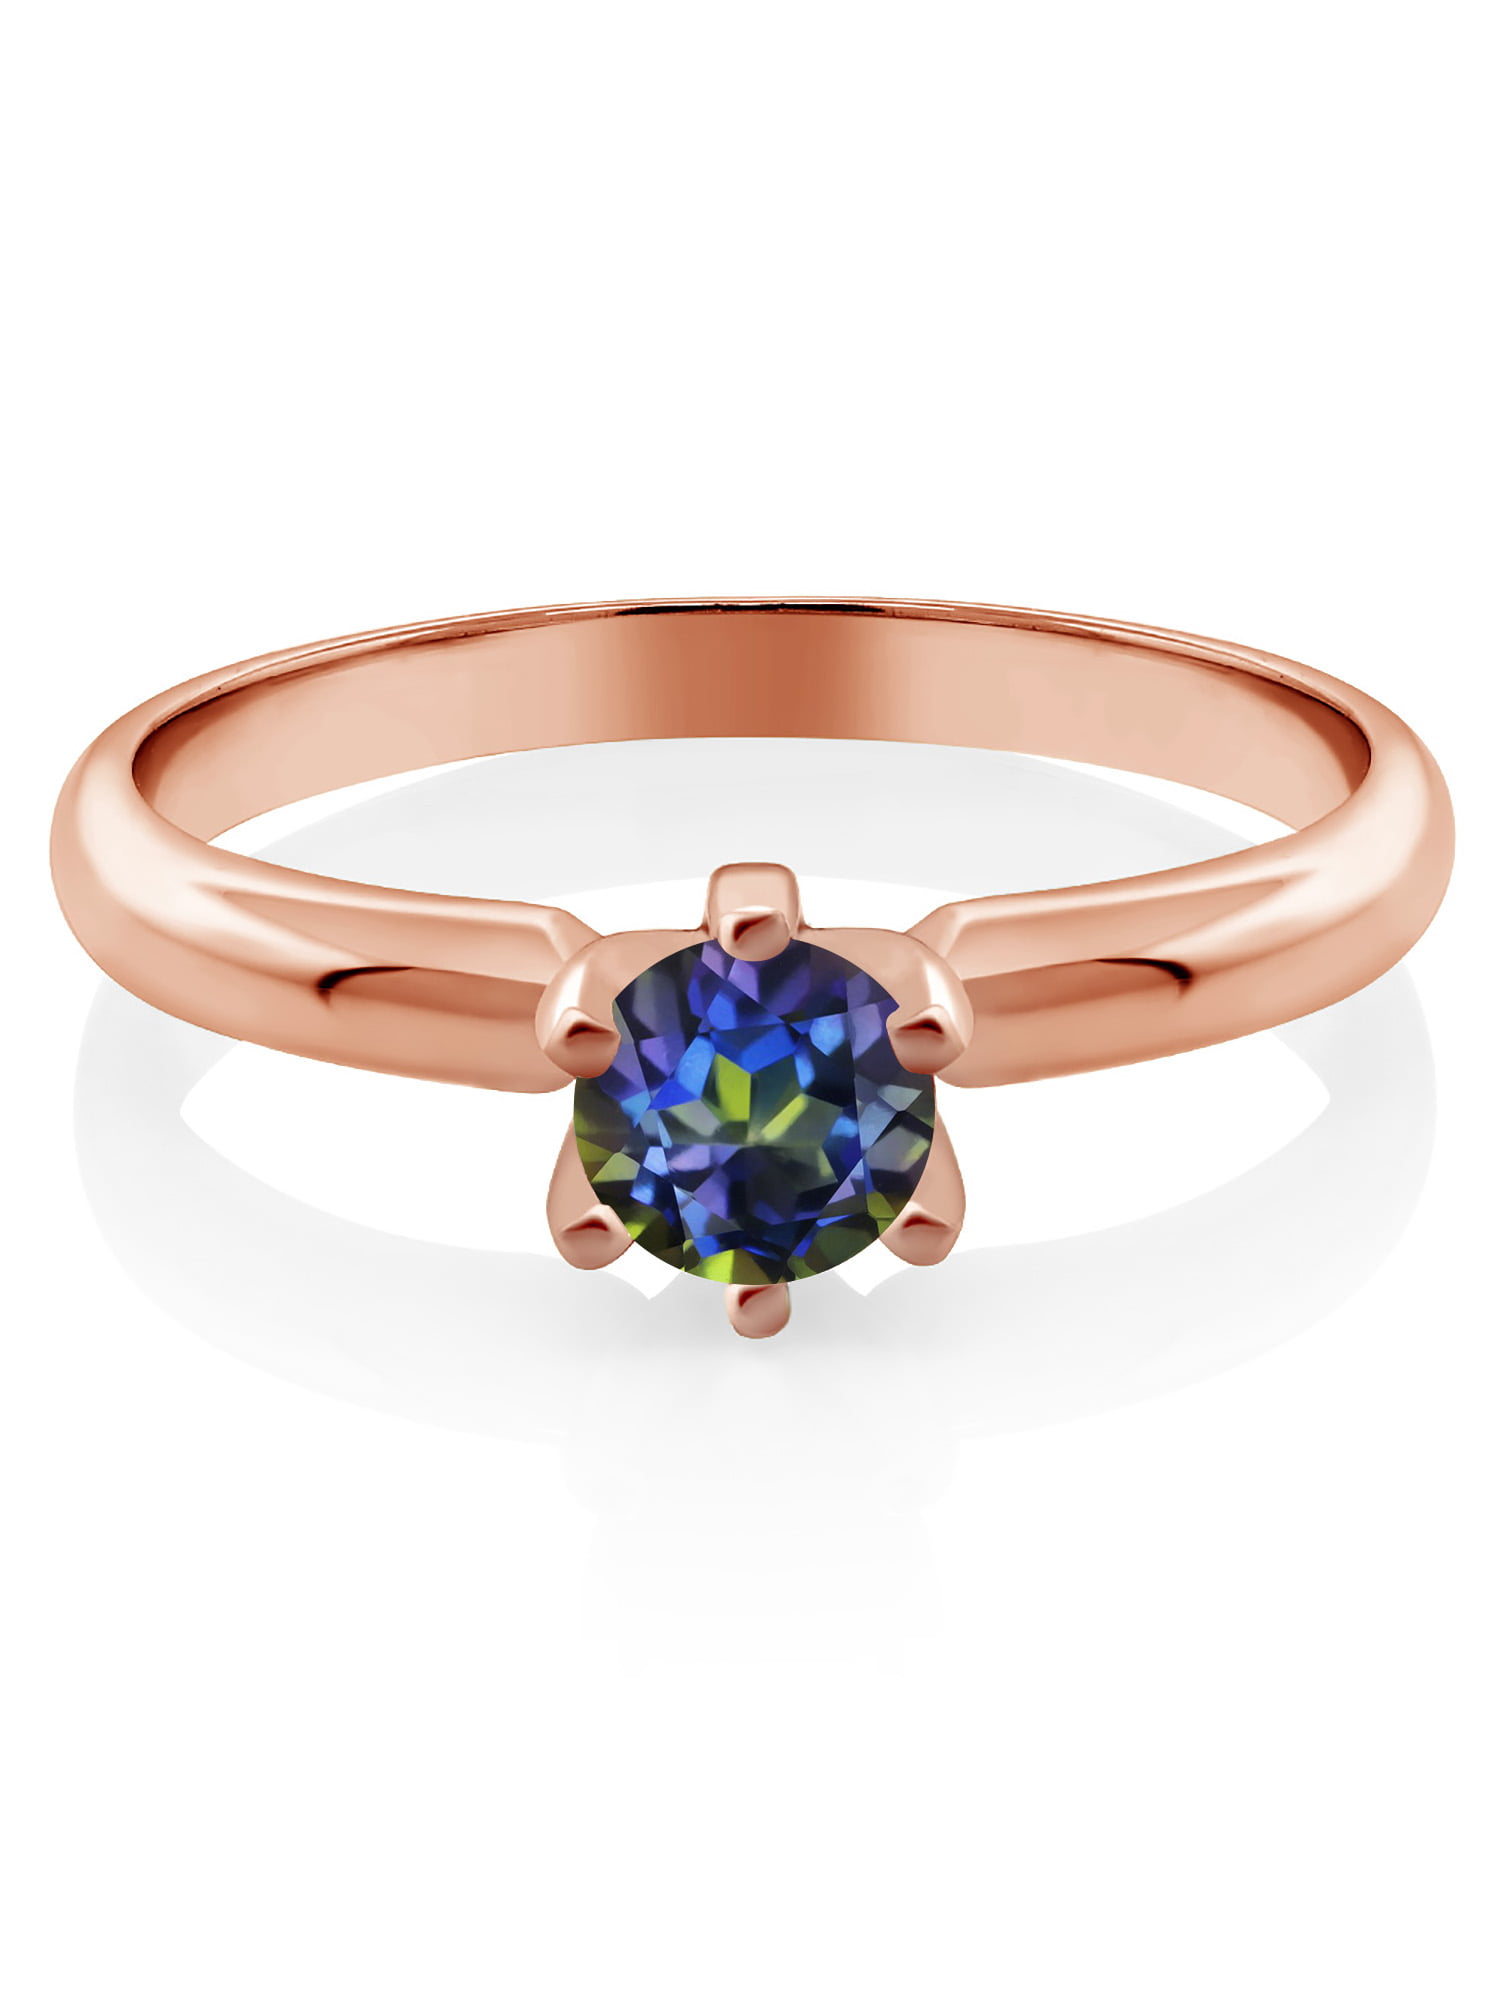 Gem Stone King 0.60 Ct Swiss Blue VS Topaz 18K Rose Gold Plated Silver Mens Solitaire Ring